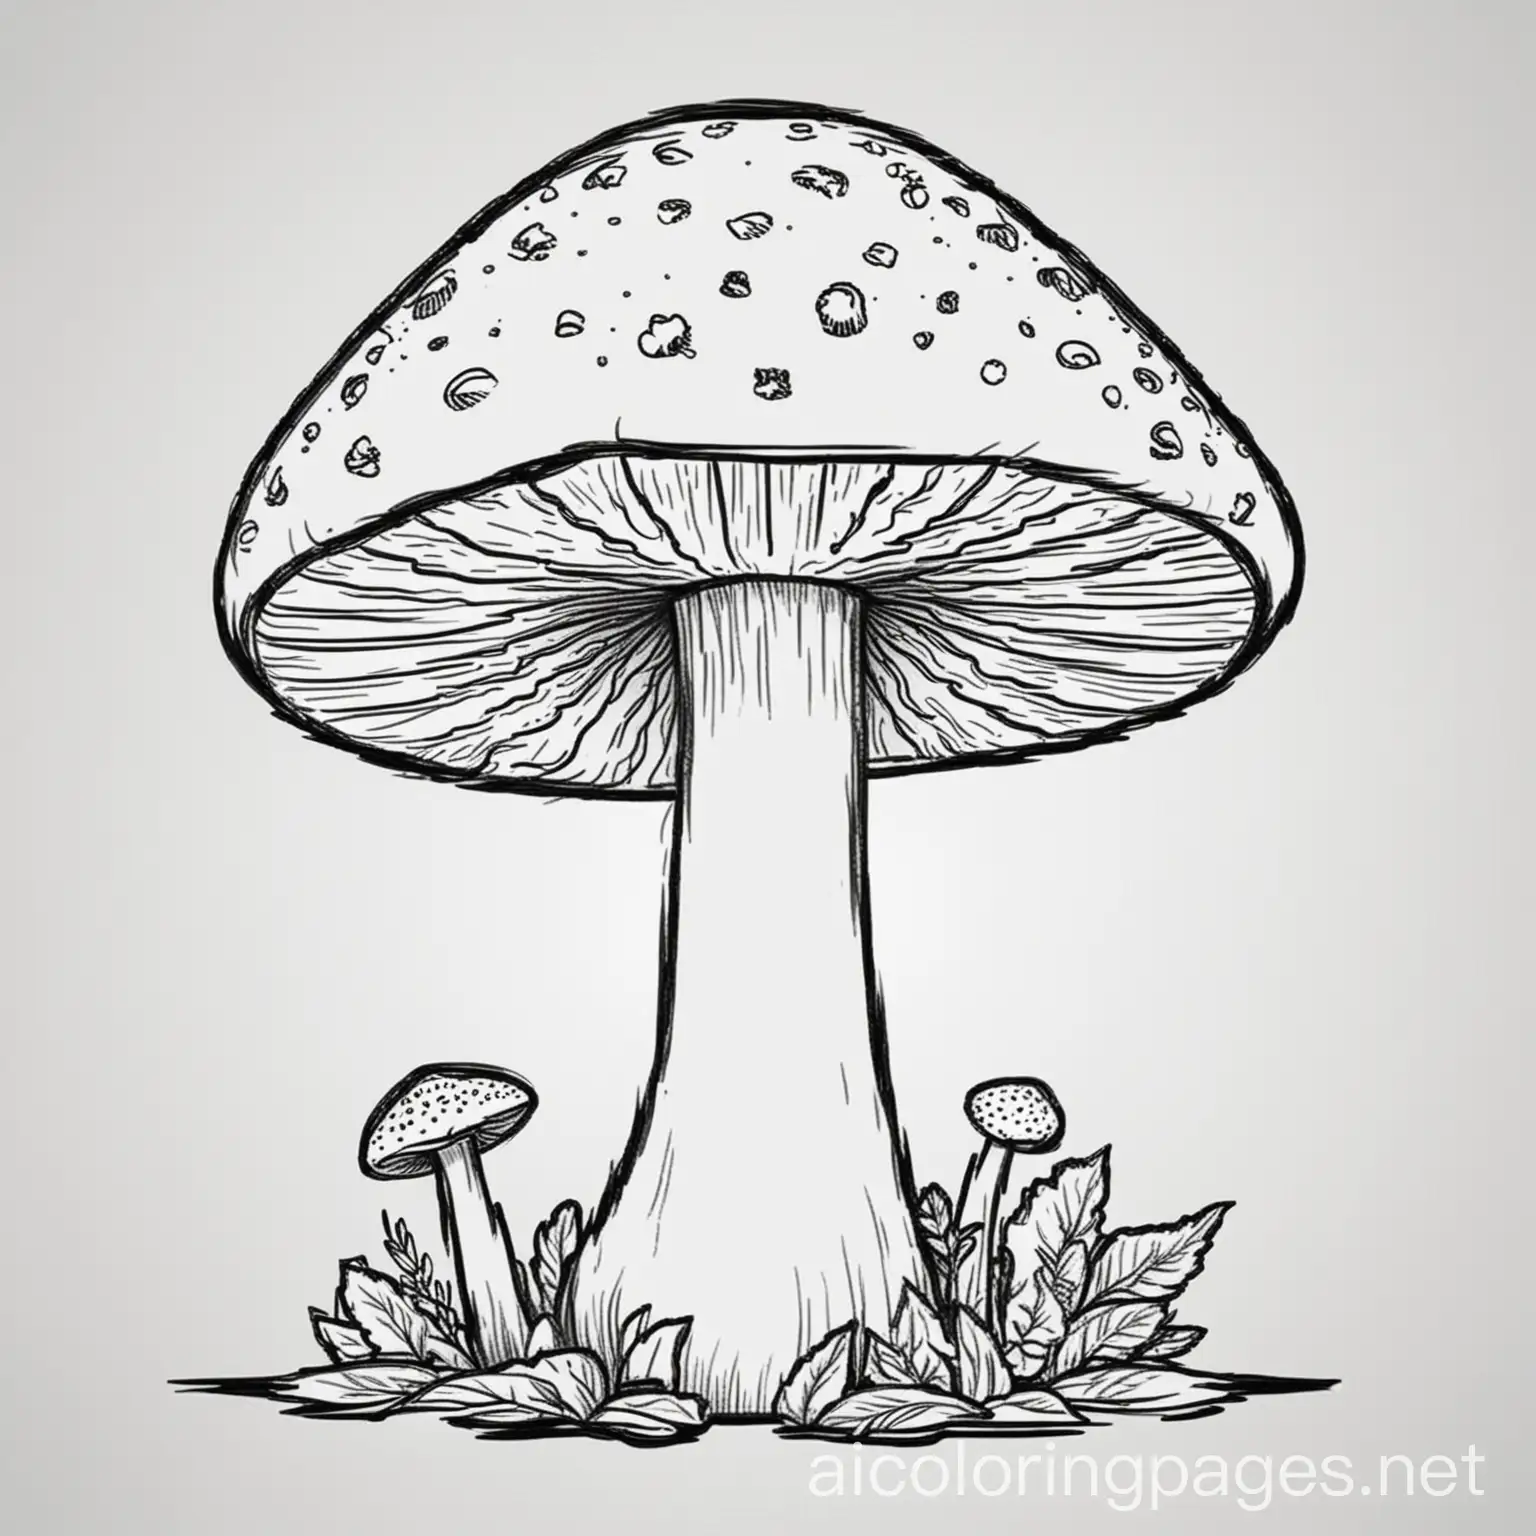 very simple coloring page for kids around the ages of 5. Coloring page of a mushroom, Coloring Page, black and white, line art, white background, Simplicity, Ample White Space. The background of the coloring page is plain white to make it easy for young children to color within the lines. The outlines of all the subjects are easy to distinguish, making it simple for kids to color without too much difficulty